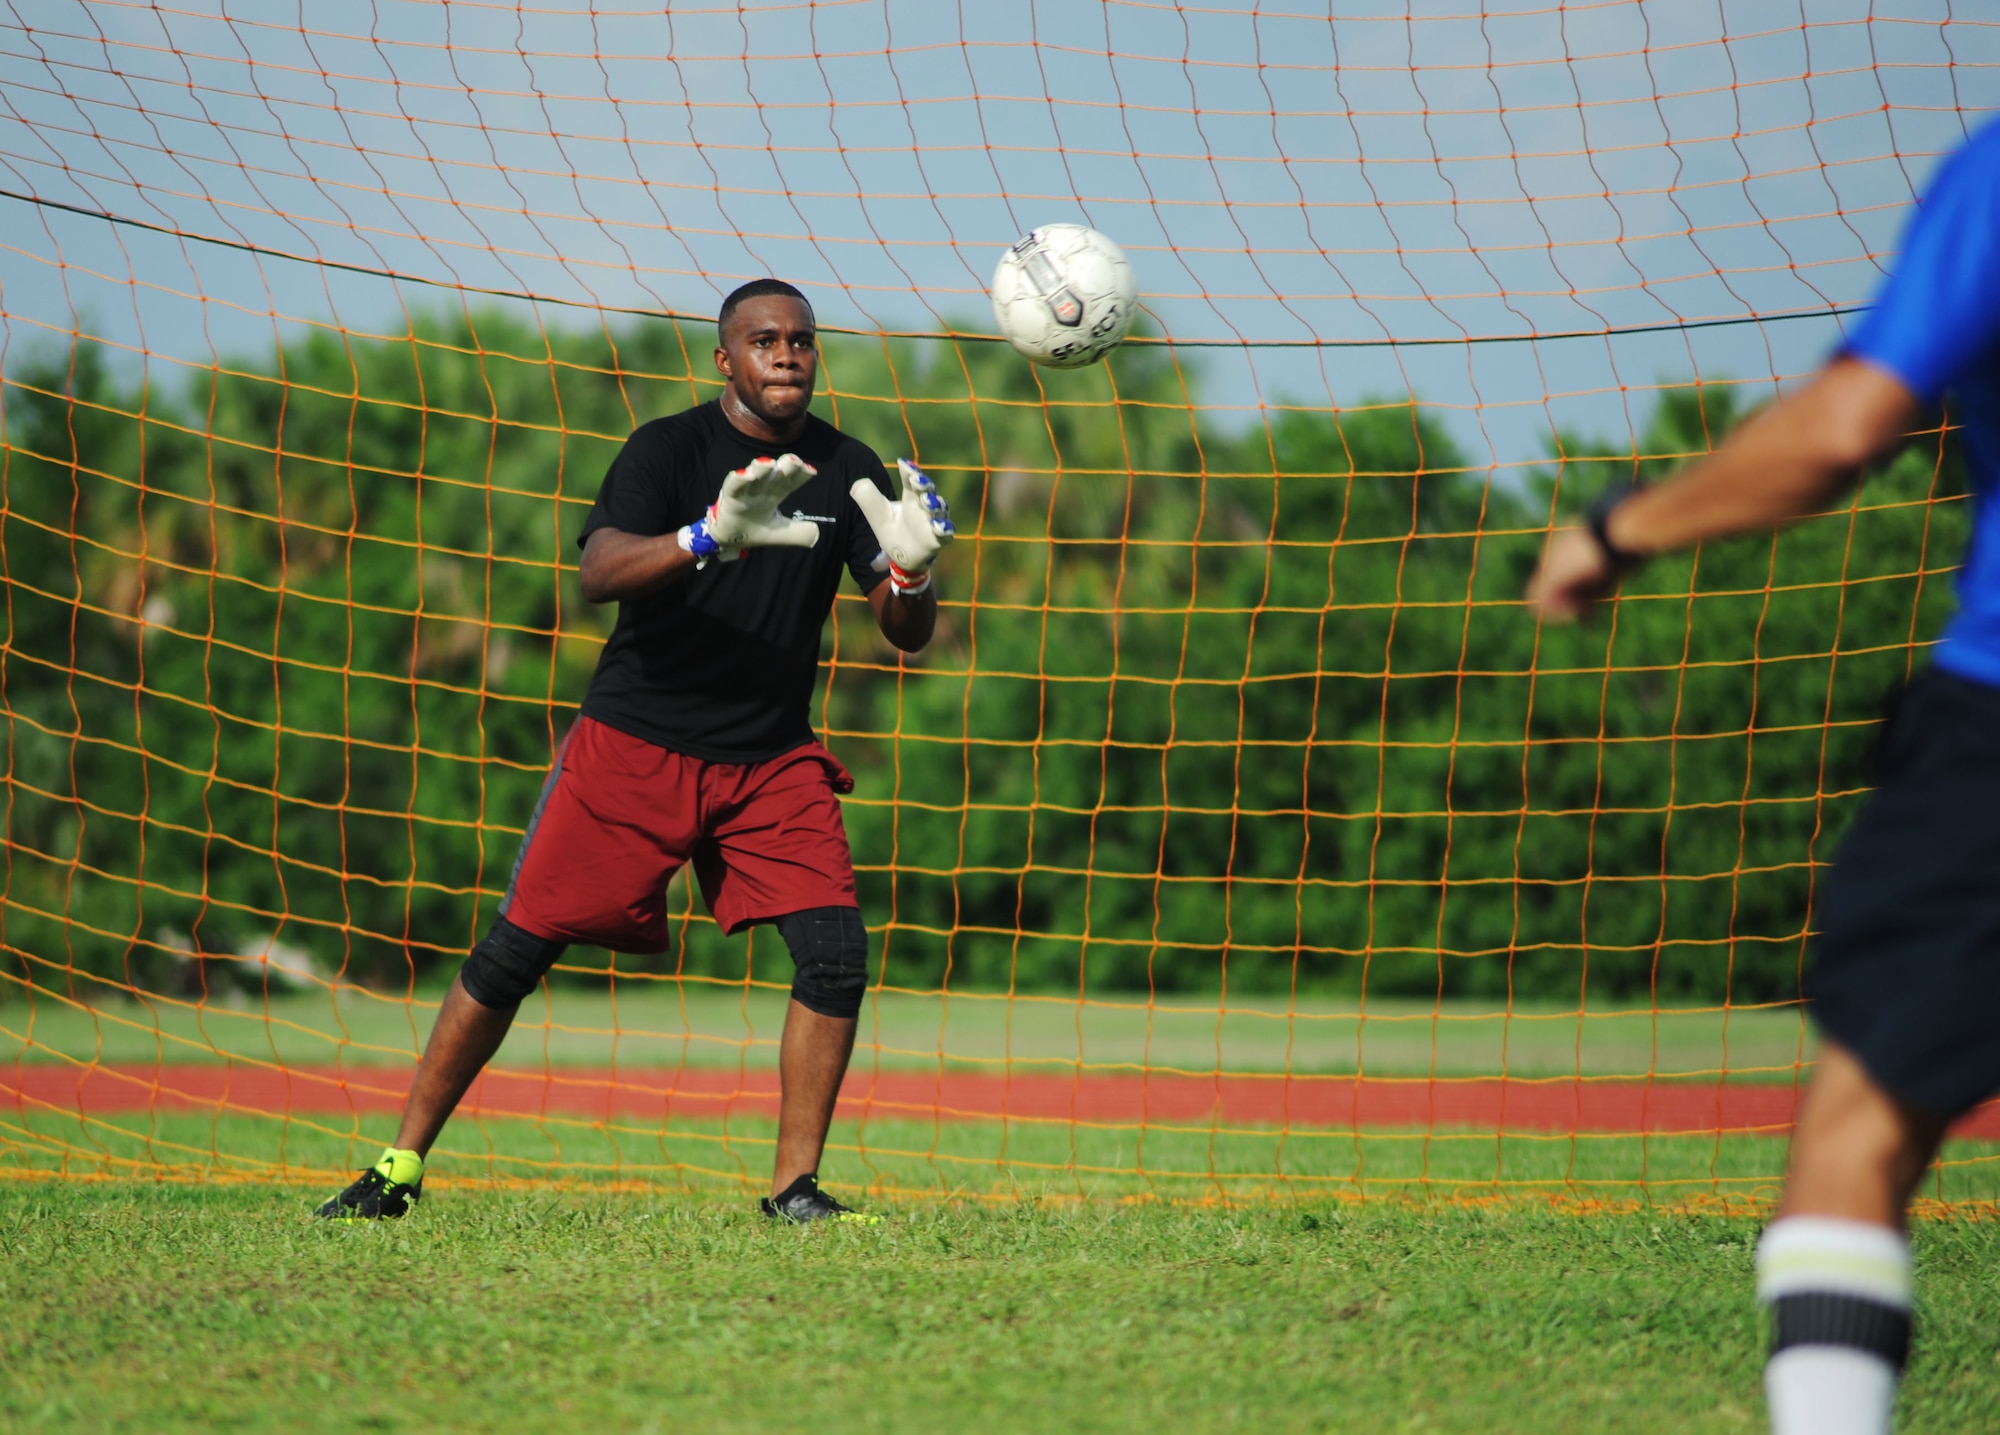 Marine Corps Lance Cpl. Devin Walker, an advance communicator assigned to U.S. Central Command prepares to block a shot during MacDill Football Club’s team practice at MacDill Air Force Base, Fla., August 3, 2016. MacDill FC has a member from each armed forces branch. (U.S. Air Force photo by Airman Adam R. Shanks)